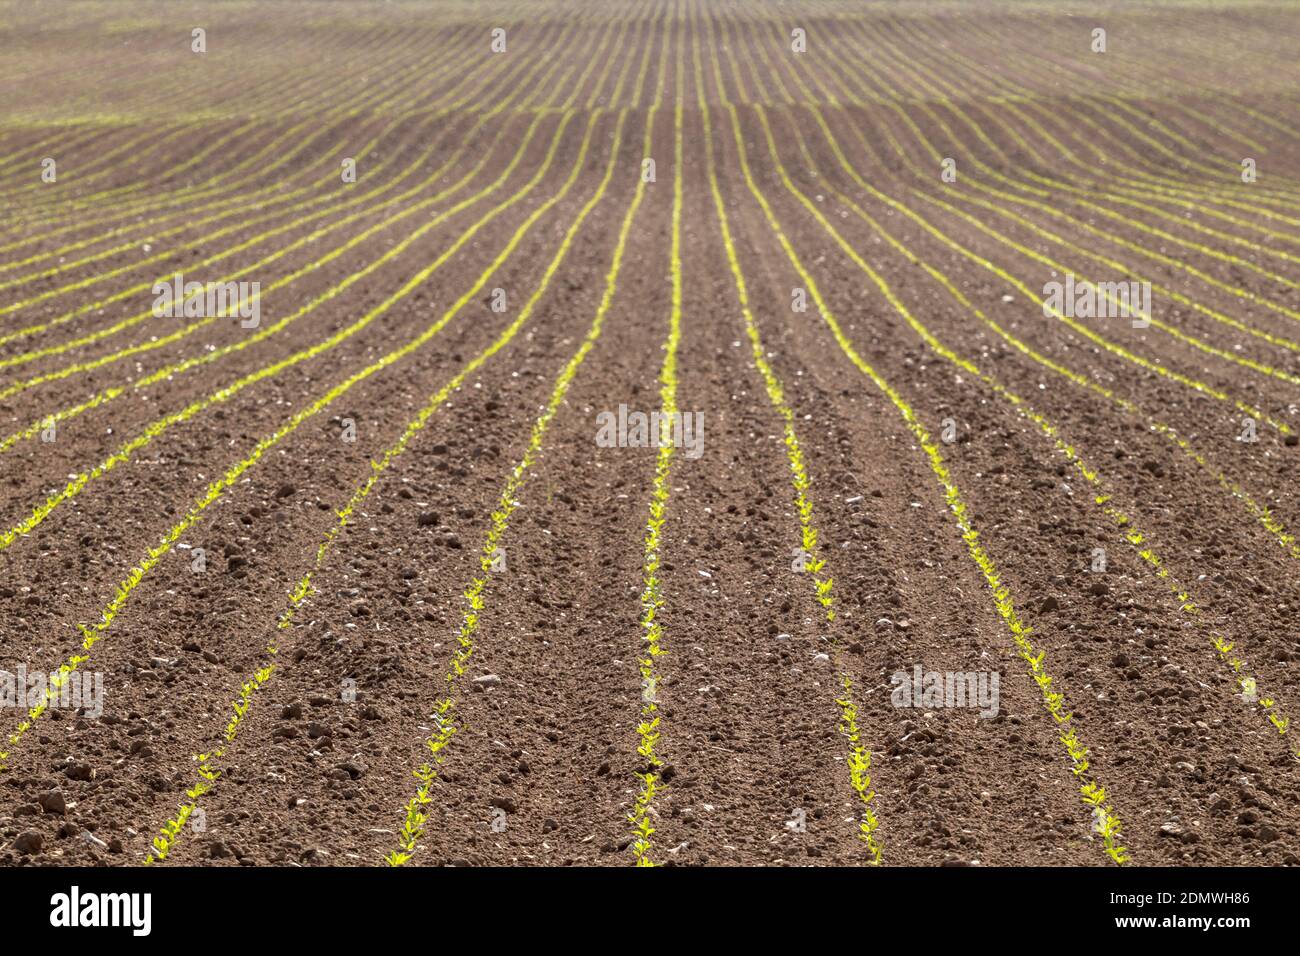 Rows of green seeds planted in a field Stock Photo